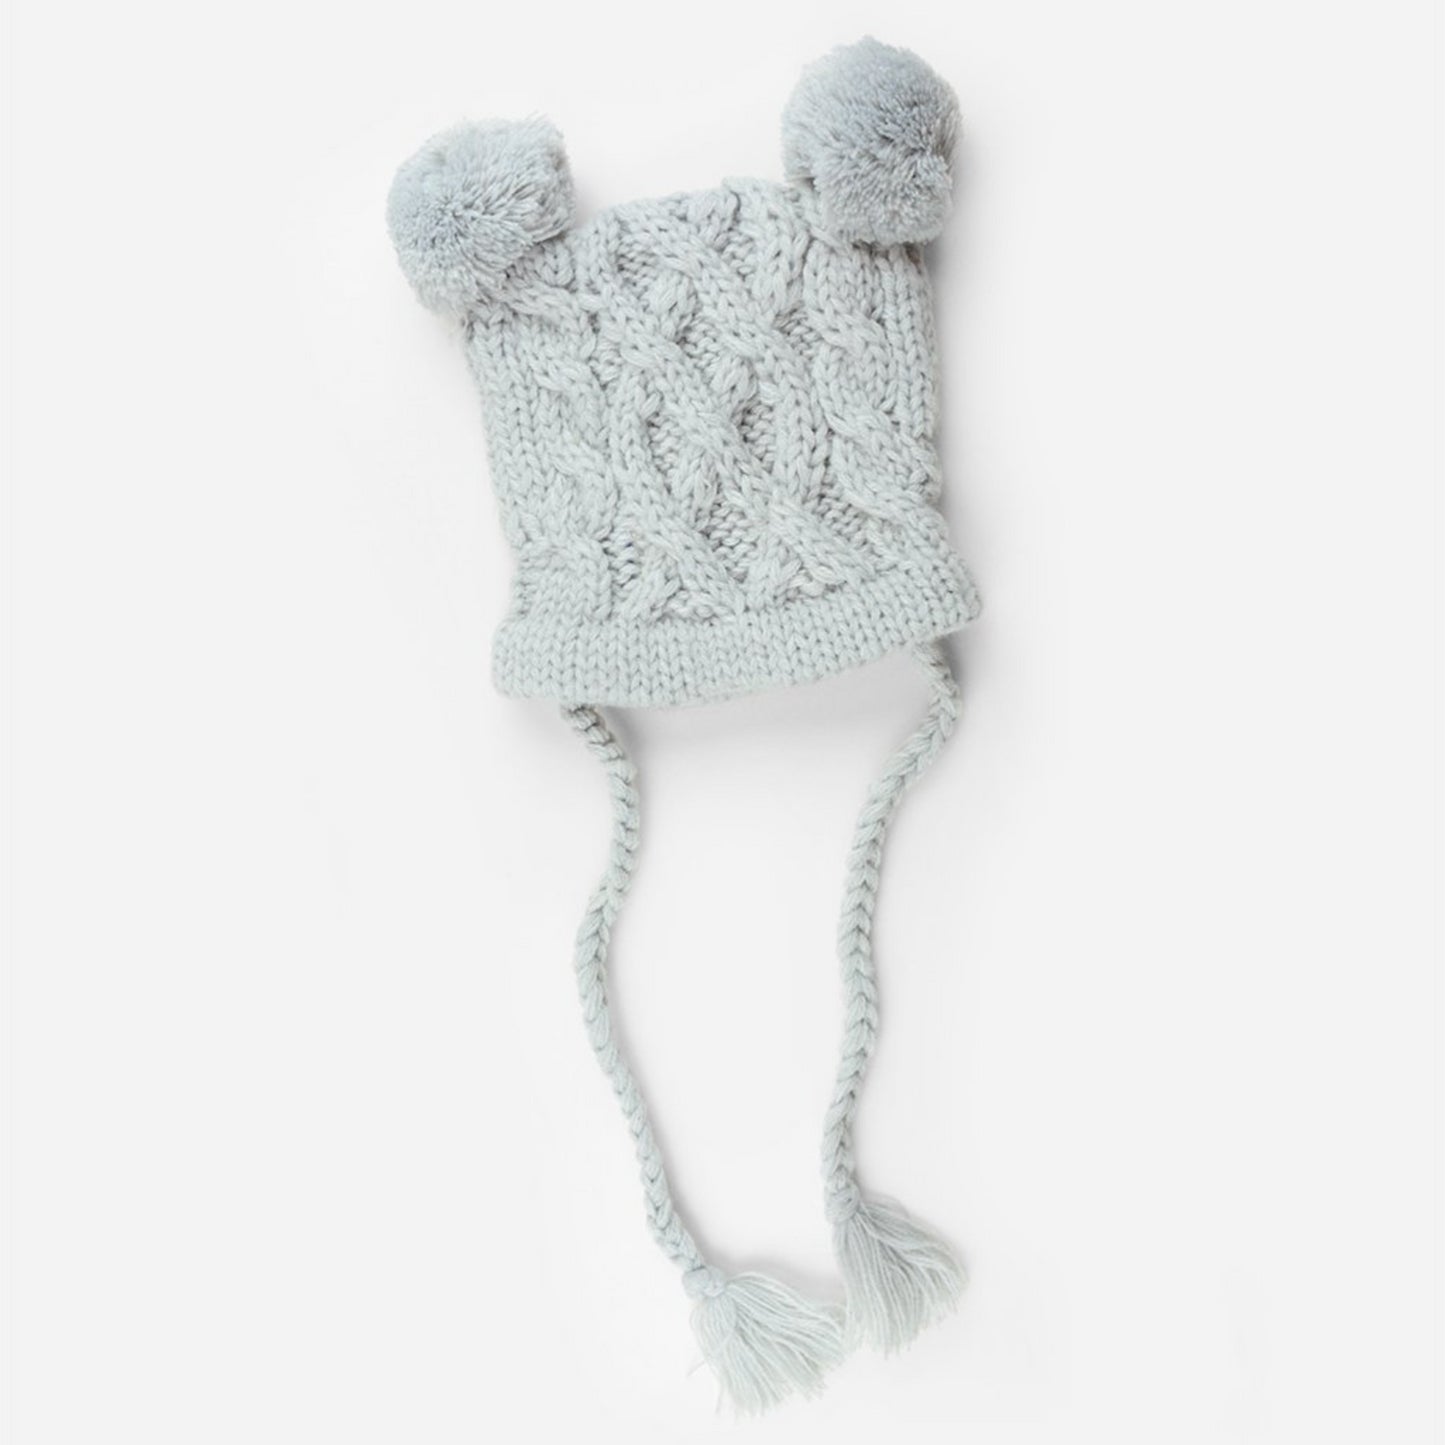 cable knit hat for baby with poms and tassels gray